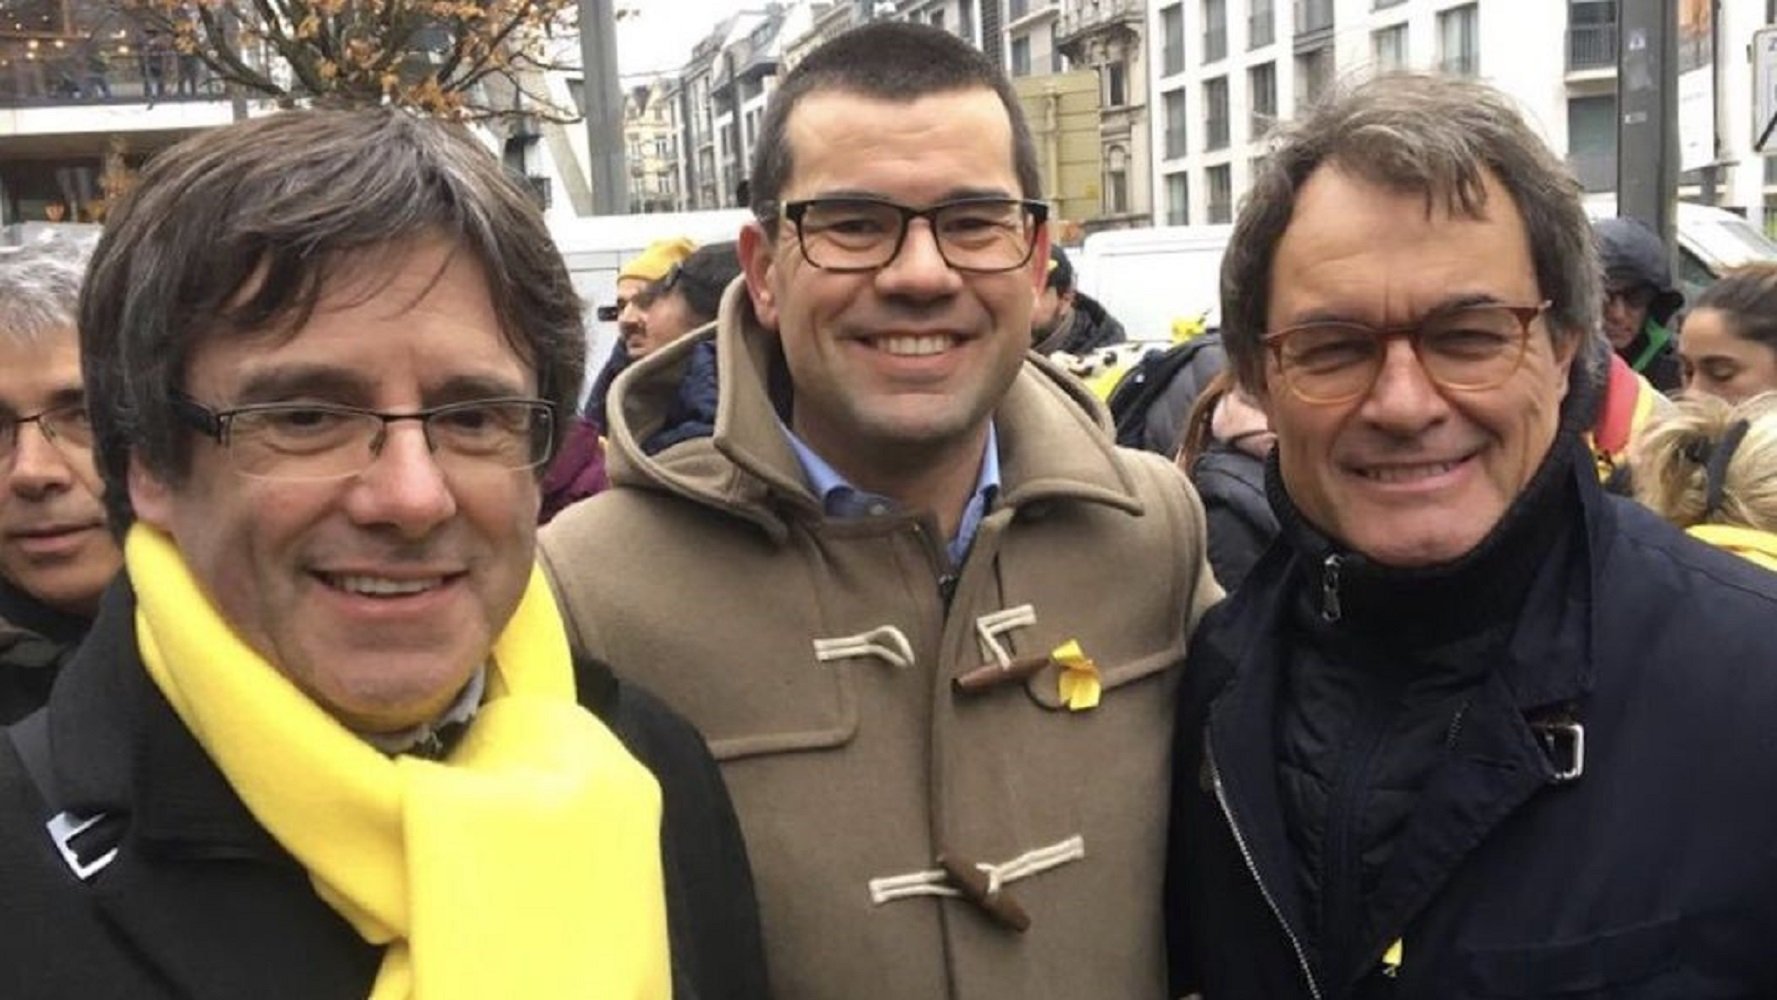 New Belgian defence minister smiles with Puigdemont, but Spain is not amused